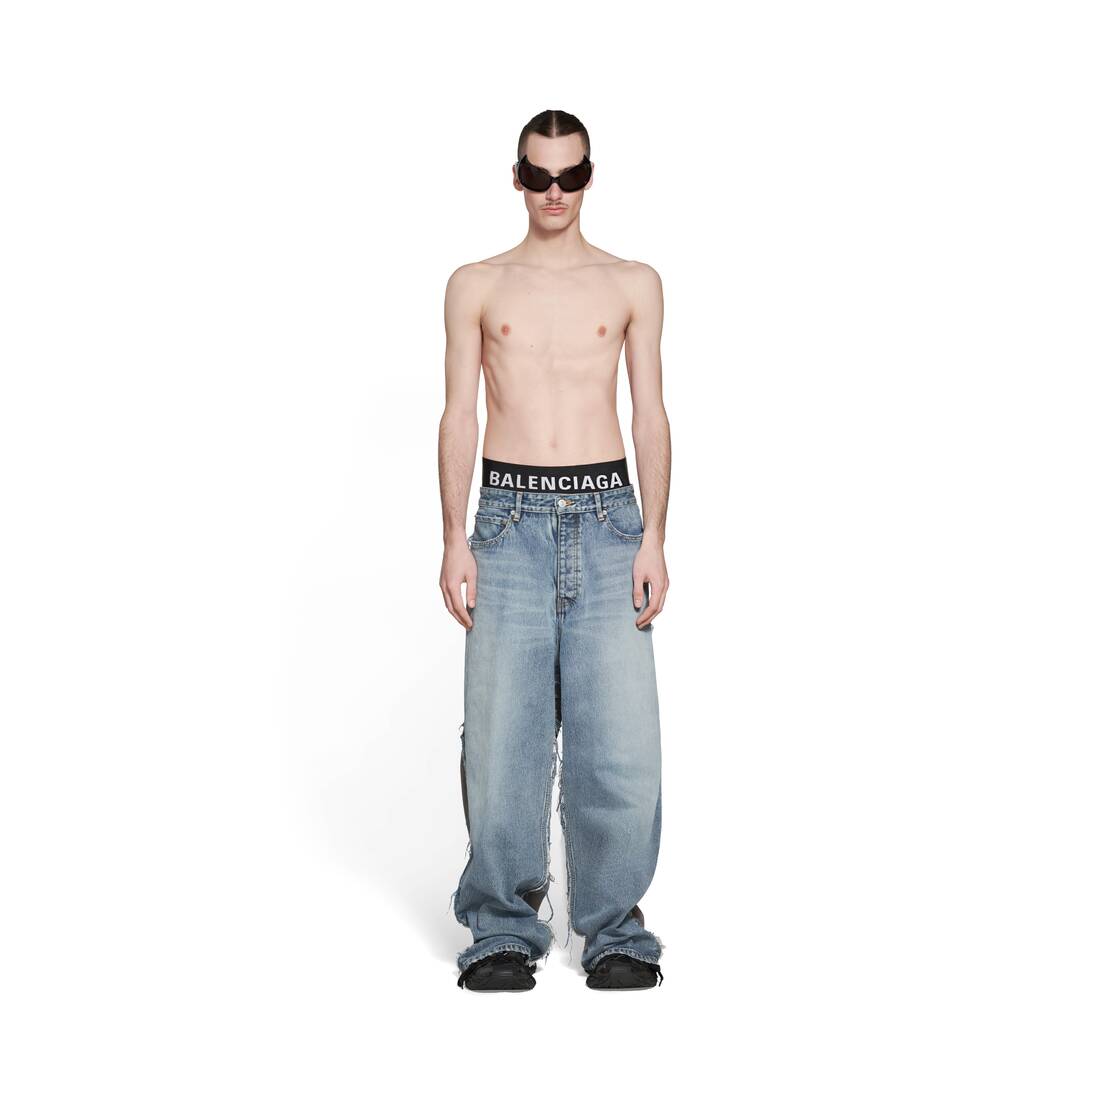 Blue Fitted Jeans by Balenciaga on Sale